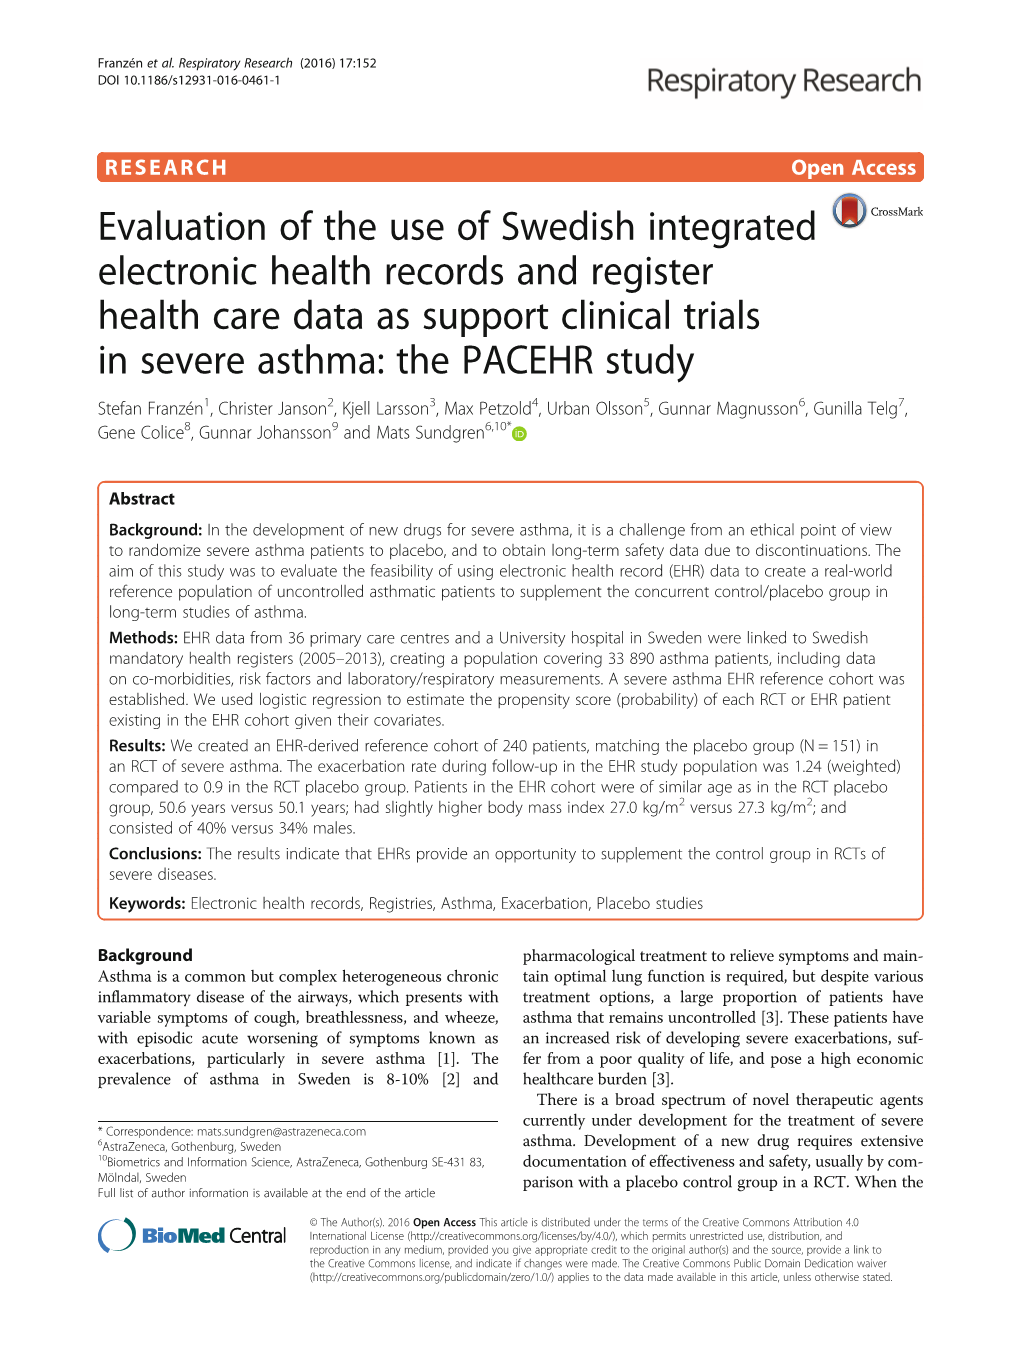 Evaluation of the Use of Swedish Integrated Electronic Health Records